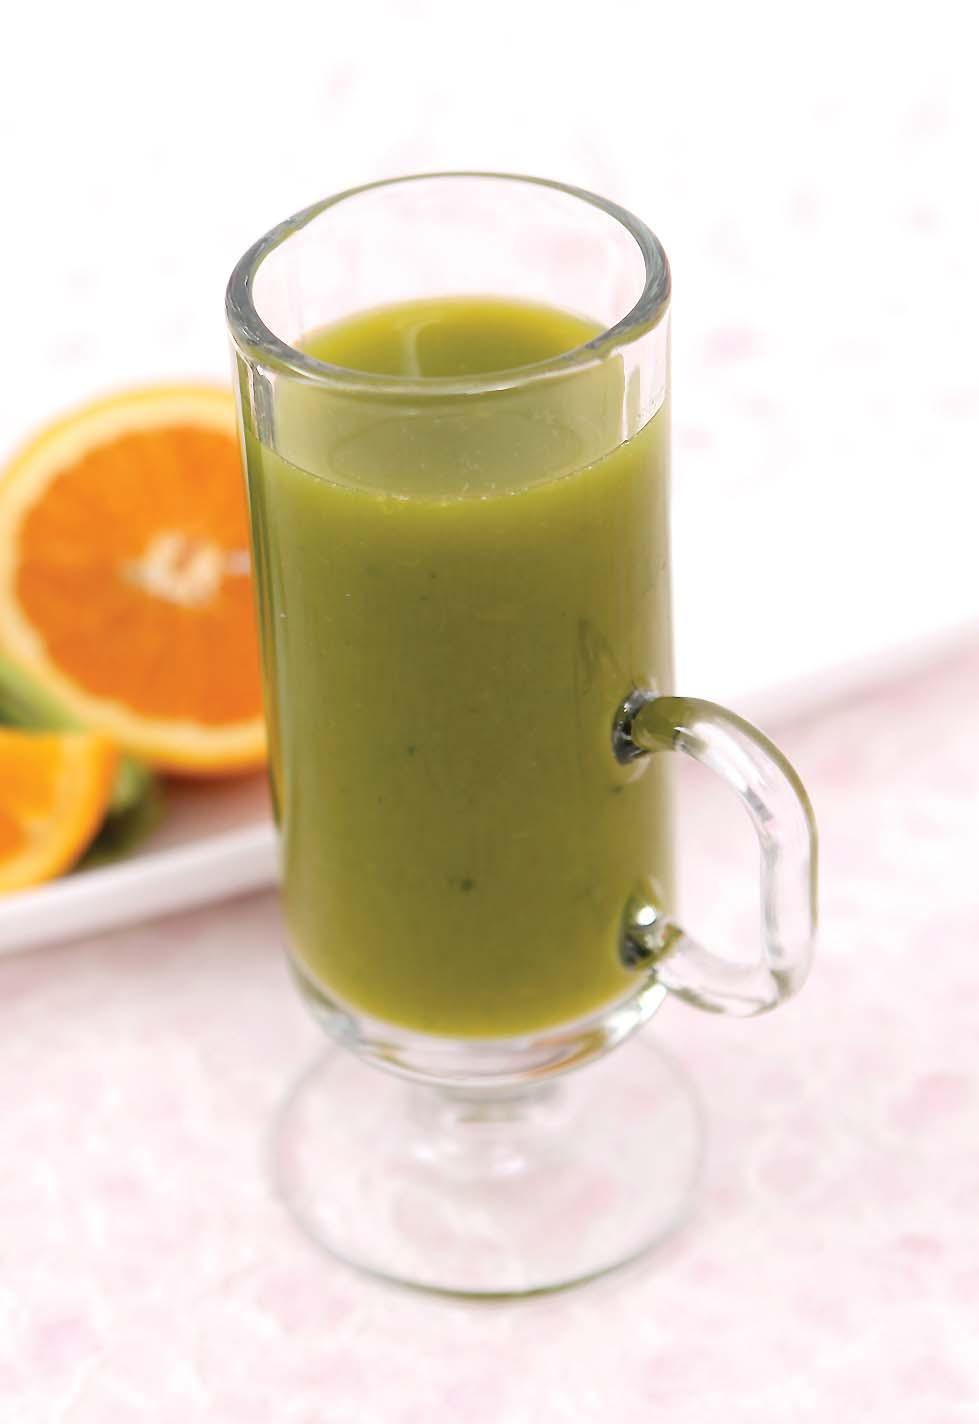 Detox11 Healing Light Green Heal your body with light green juice. 1 Peel the pear. Cut the pear as needed to fit the chute 2 Peel the orange.